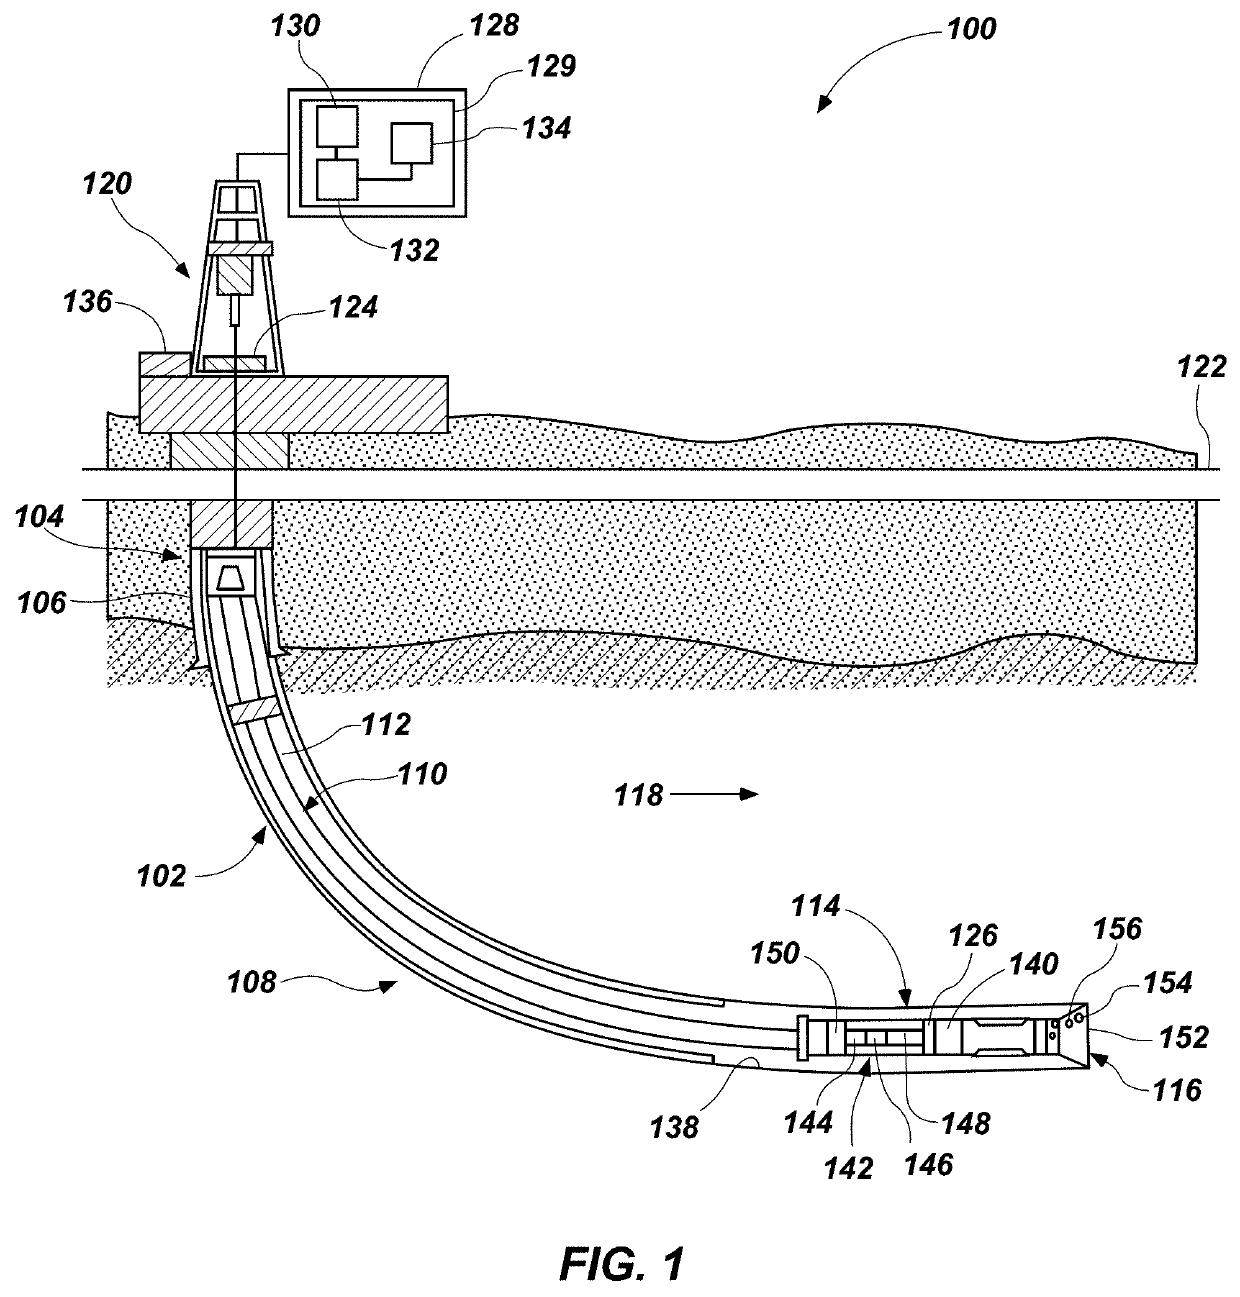 Earth-boring tool rate of penetration and wear prediction system and related methods